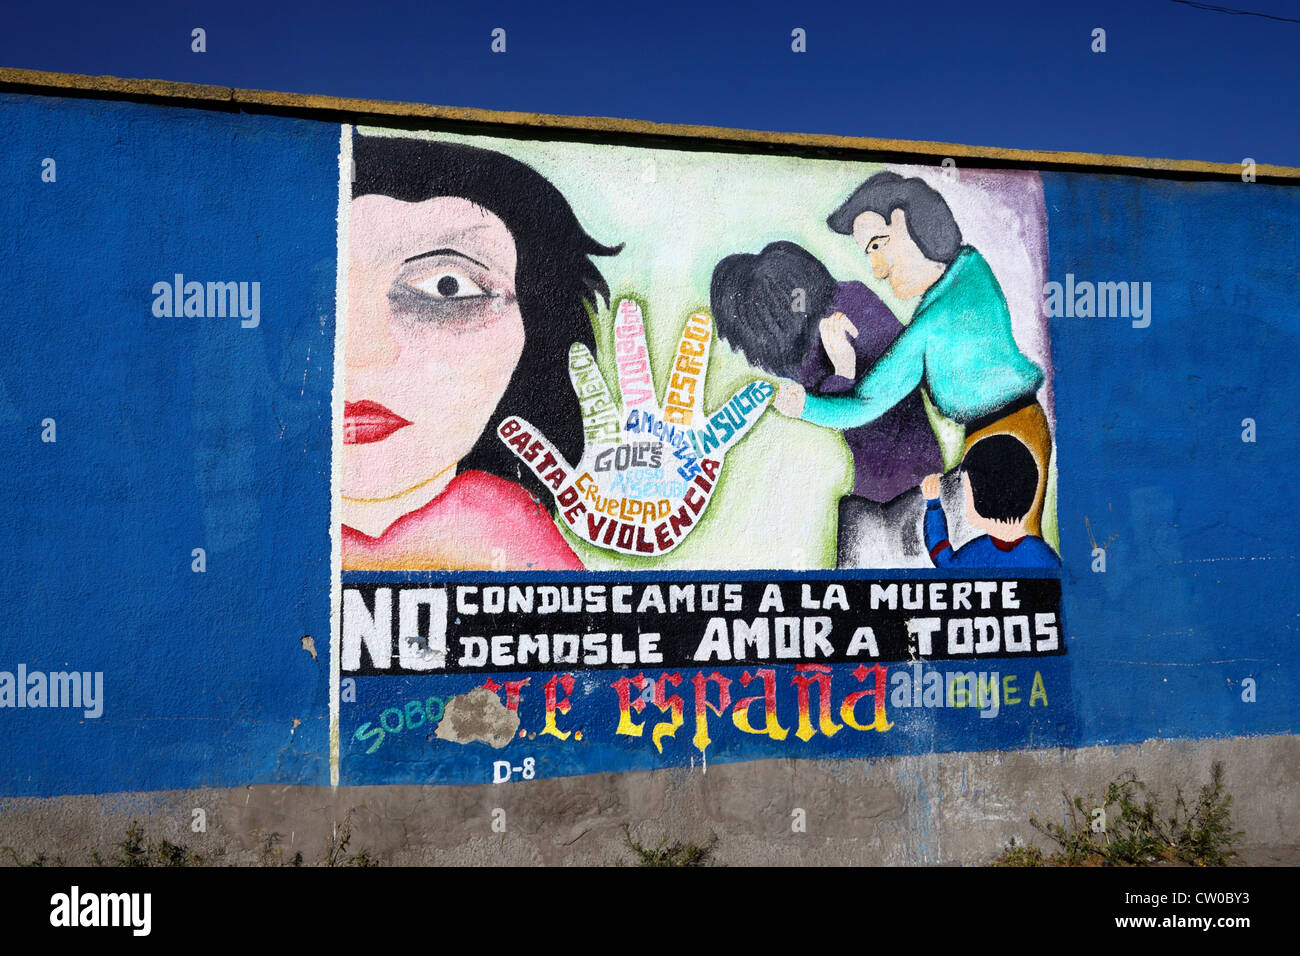 Mural that is part of a campaign to reduce domestic abuse and violence, El Alto, Bolivia Stock Photo